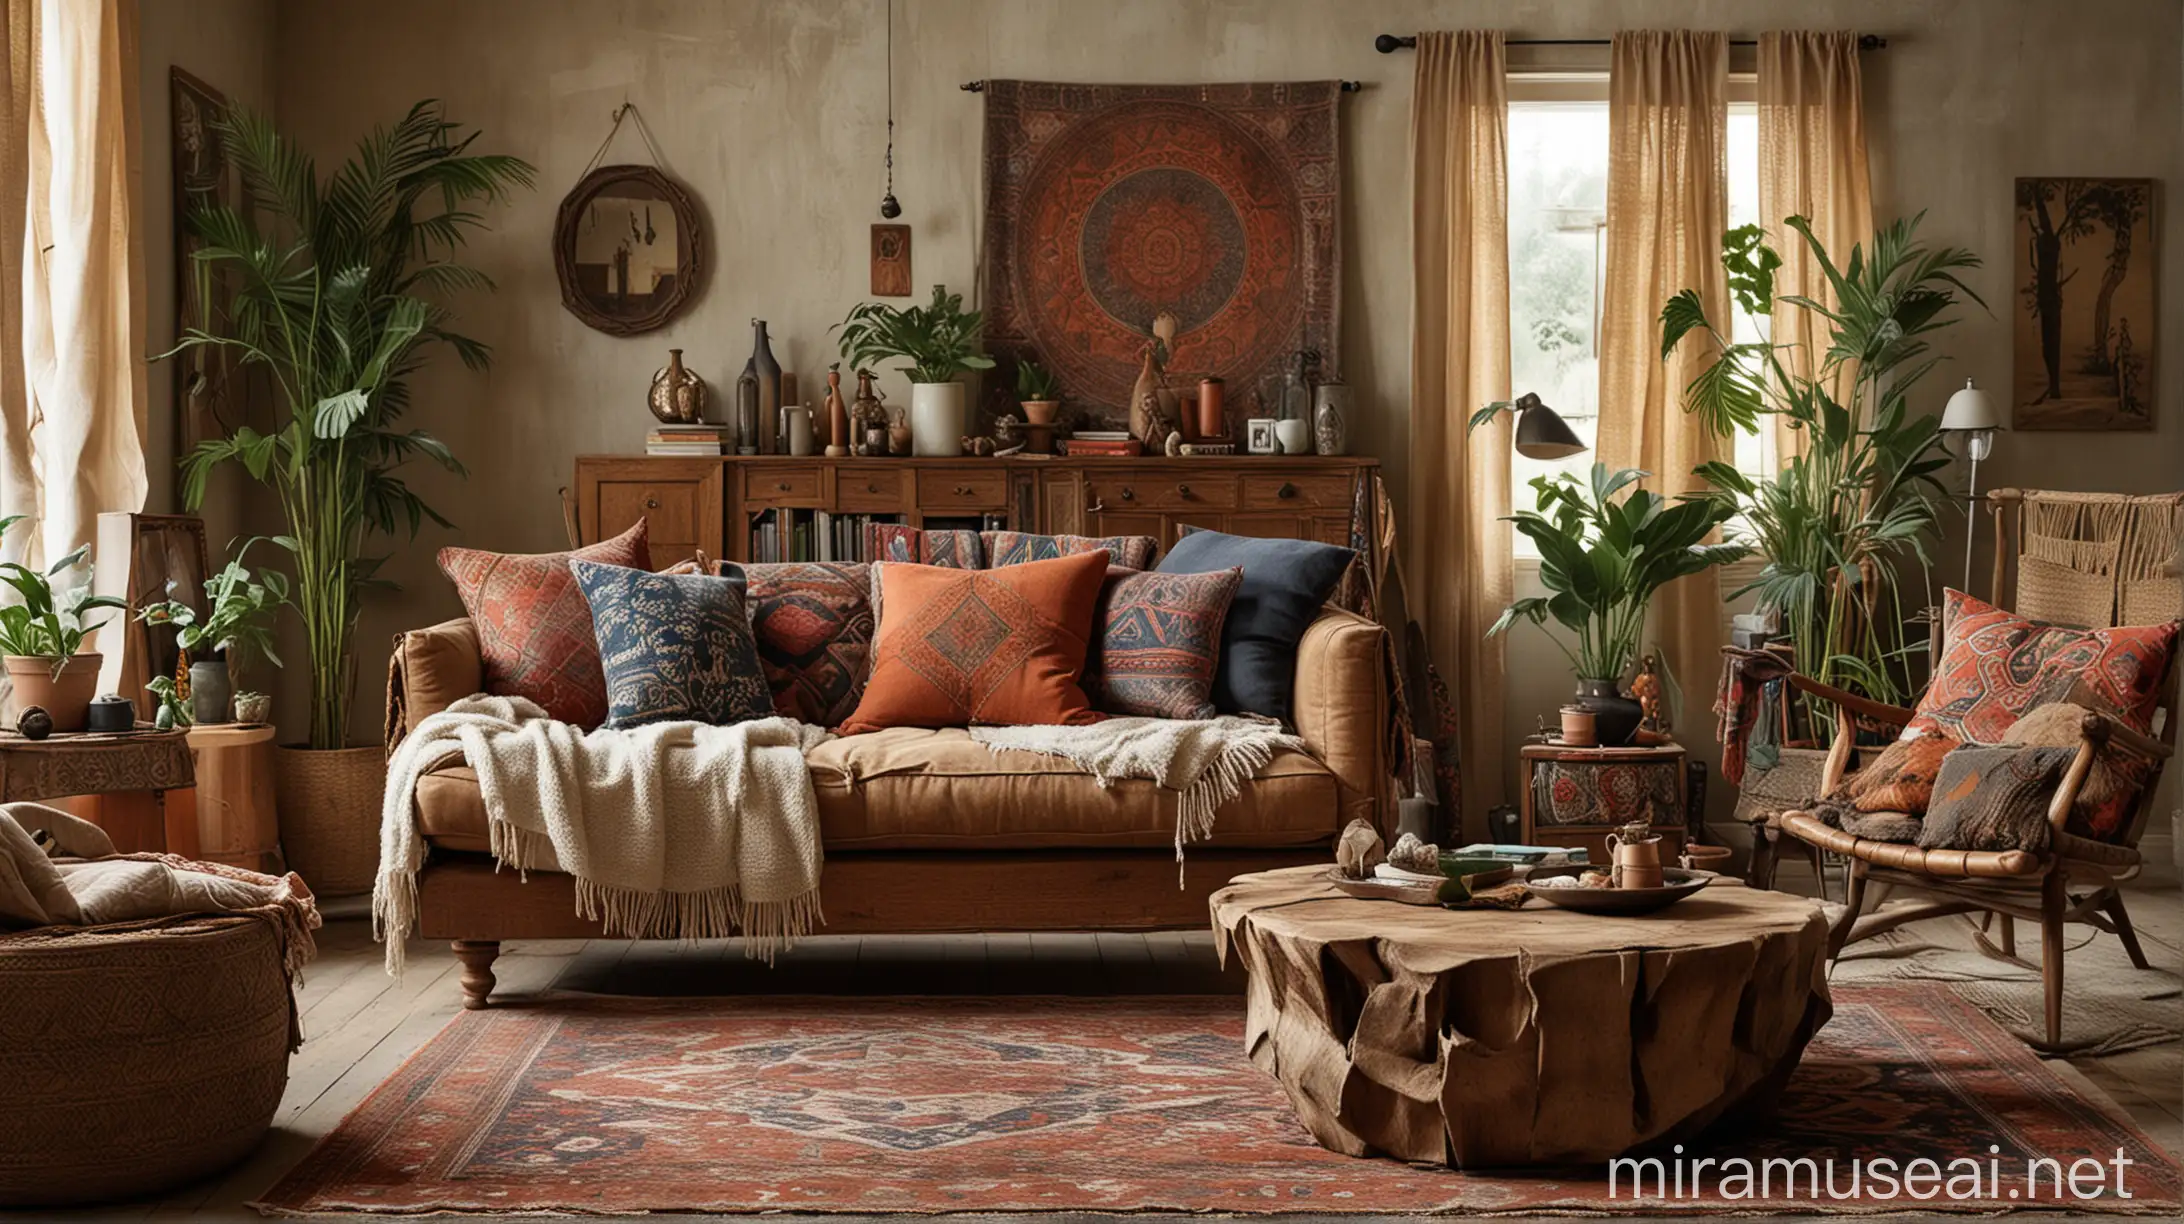 Bohemian Nomadic Living Room with Natural Materials and Eclectic Textures